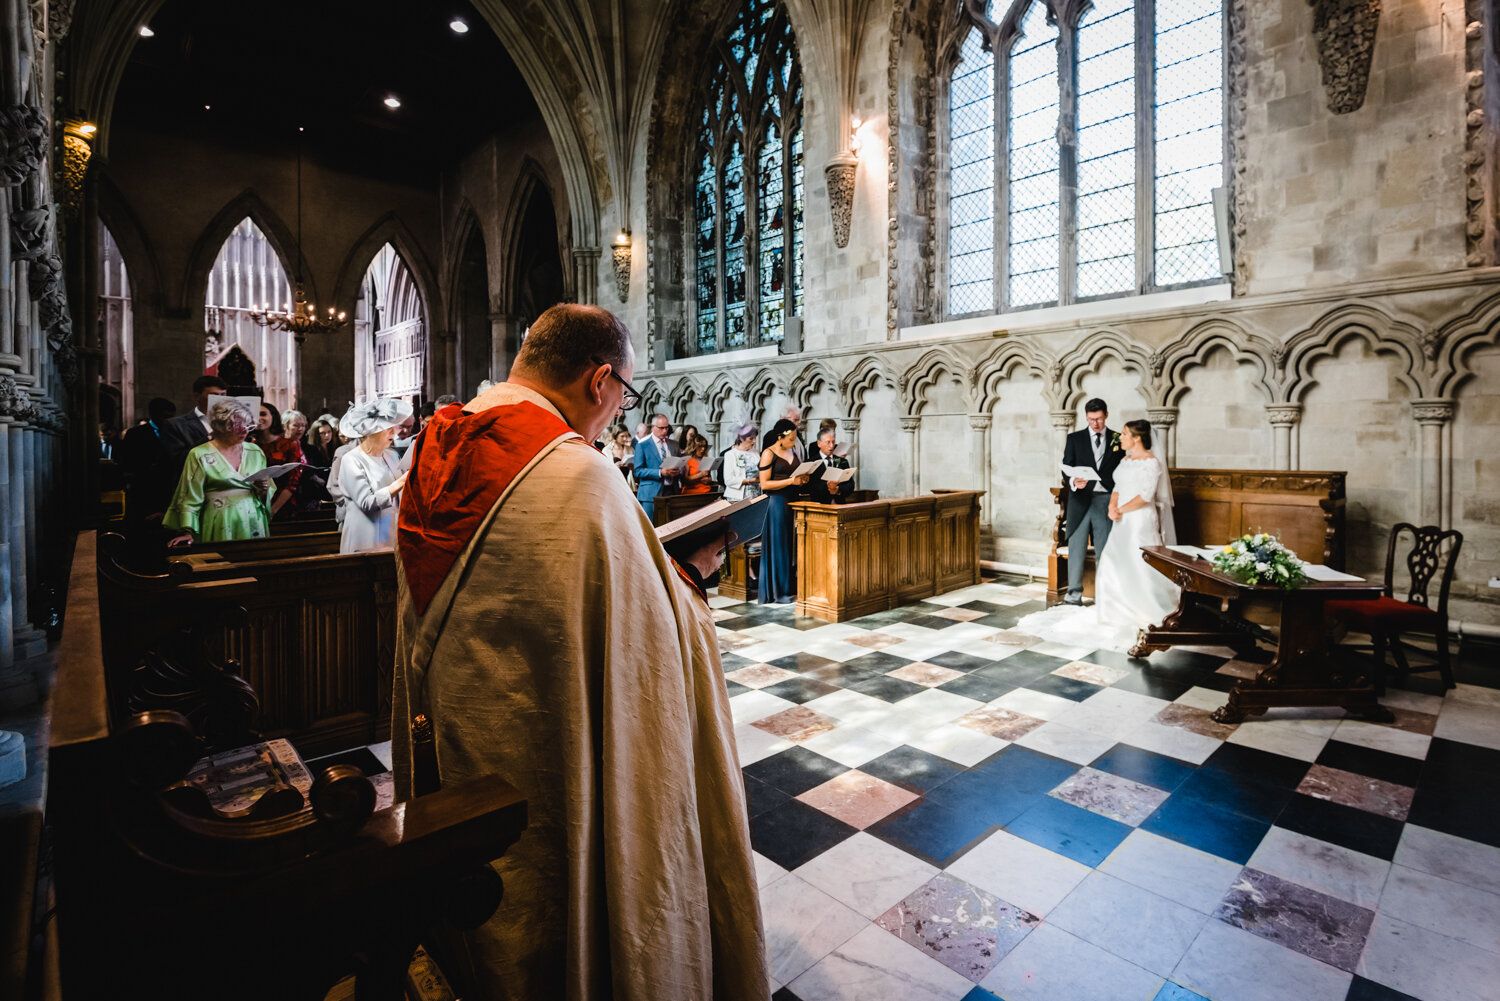 st-albans-cathedral-abbey-wedding-photos-pike-photography-152.jpg